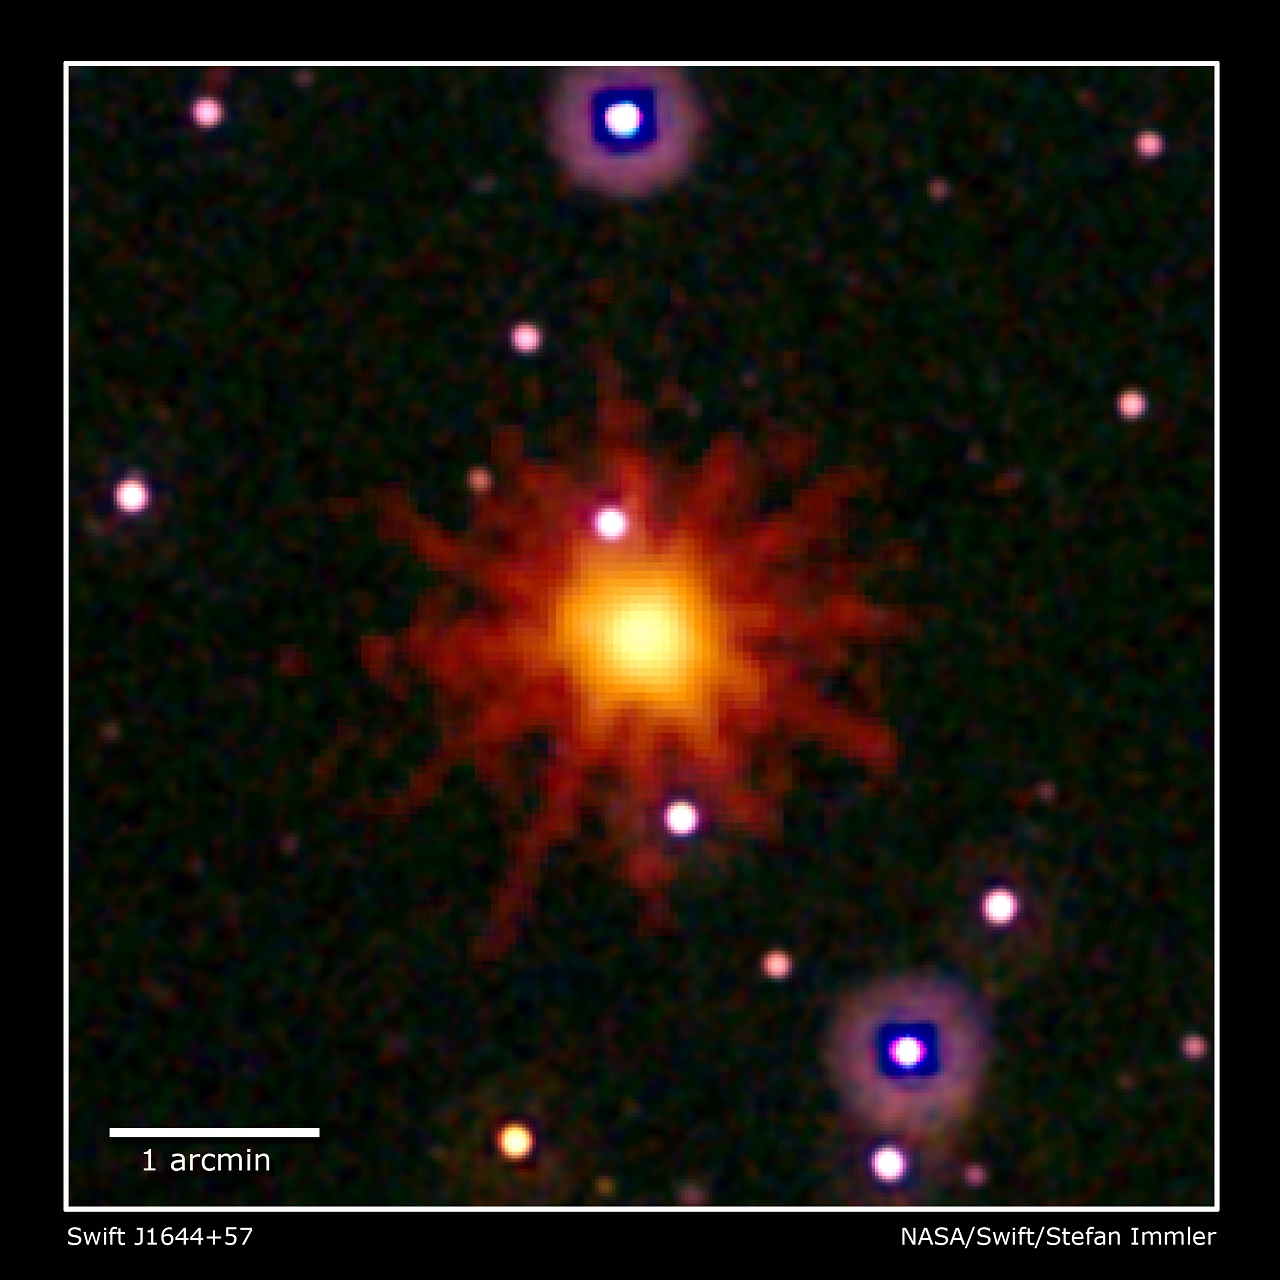 An X-ray outburst astronomers classify as a tidal disruption event. The event is seen only in the X-ray image, which is a 3.4-hour exposure taken on March 28, 2011. The outburst was triggered when a passing star came too close to a supermassive black hole. The star was torn apart, and much of the gas fell toward the black hole. To date, this is the only tidal disruption event emitting high-energy X-rays that astronomers have caught at peak luminosity. Credits: NASA/Swift/Stefan Immler